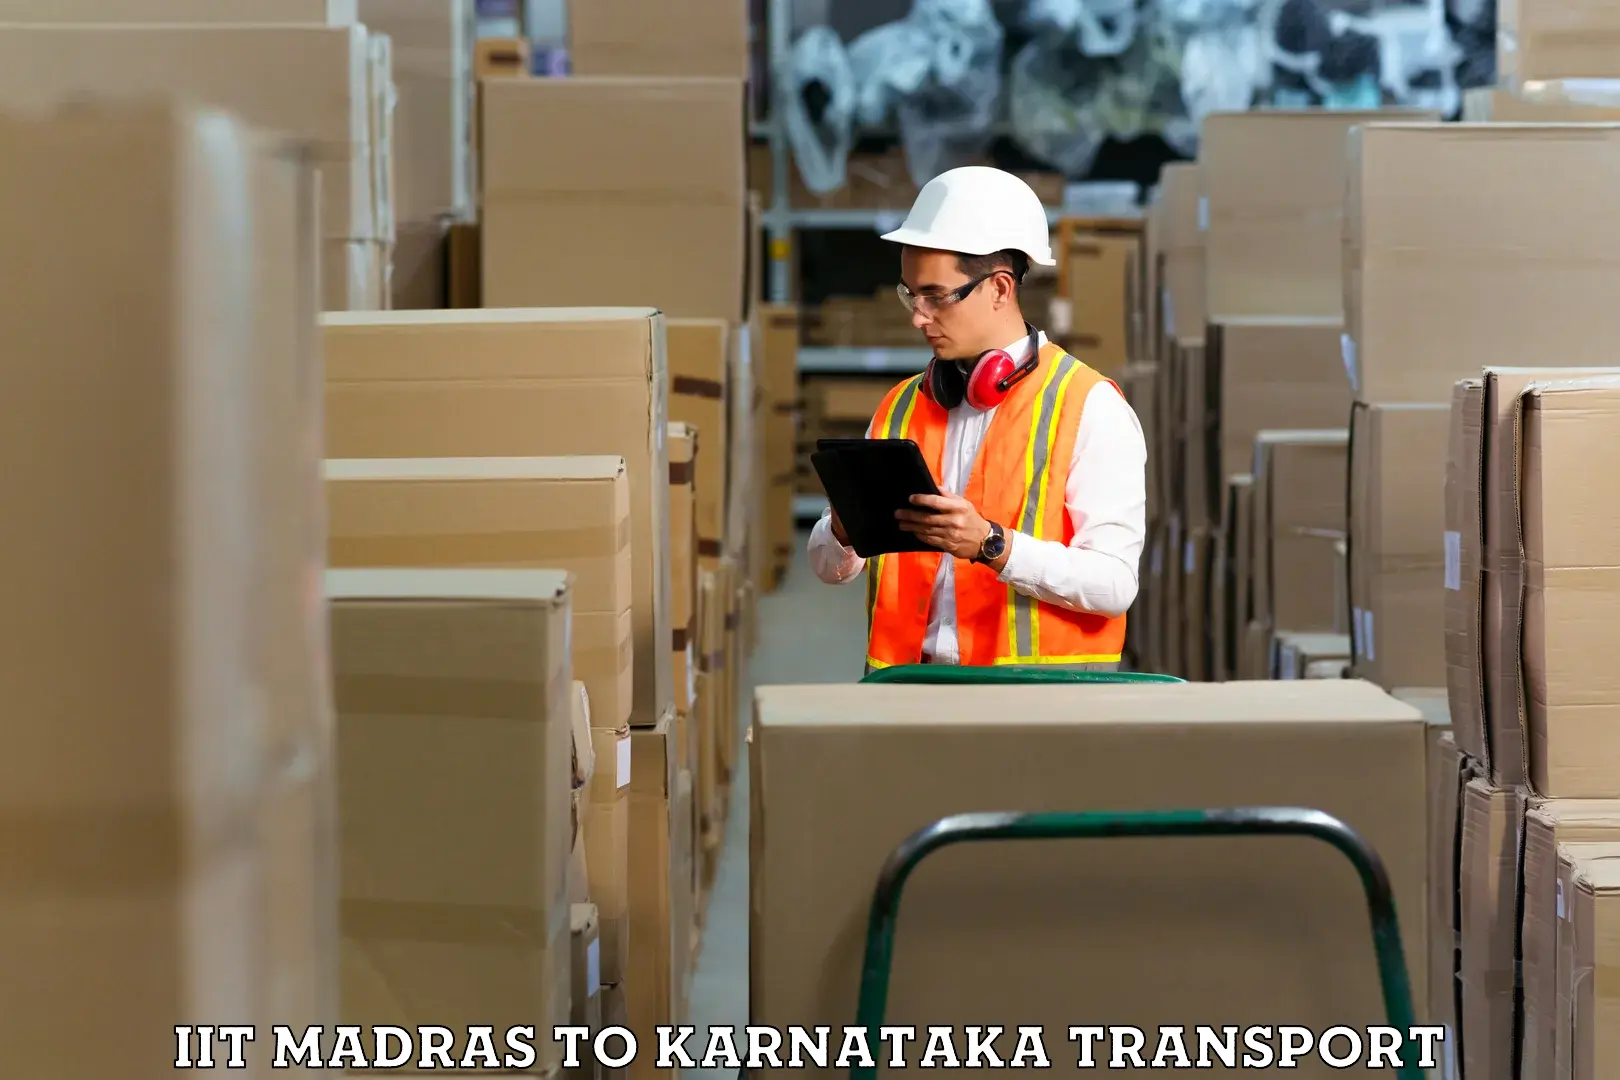 Container transportation services in IIT Madras to Karnataka